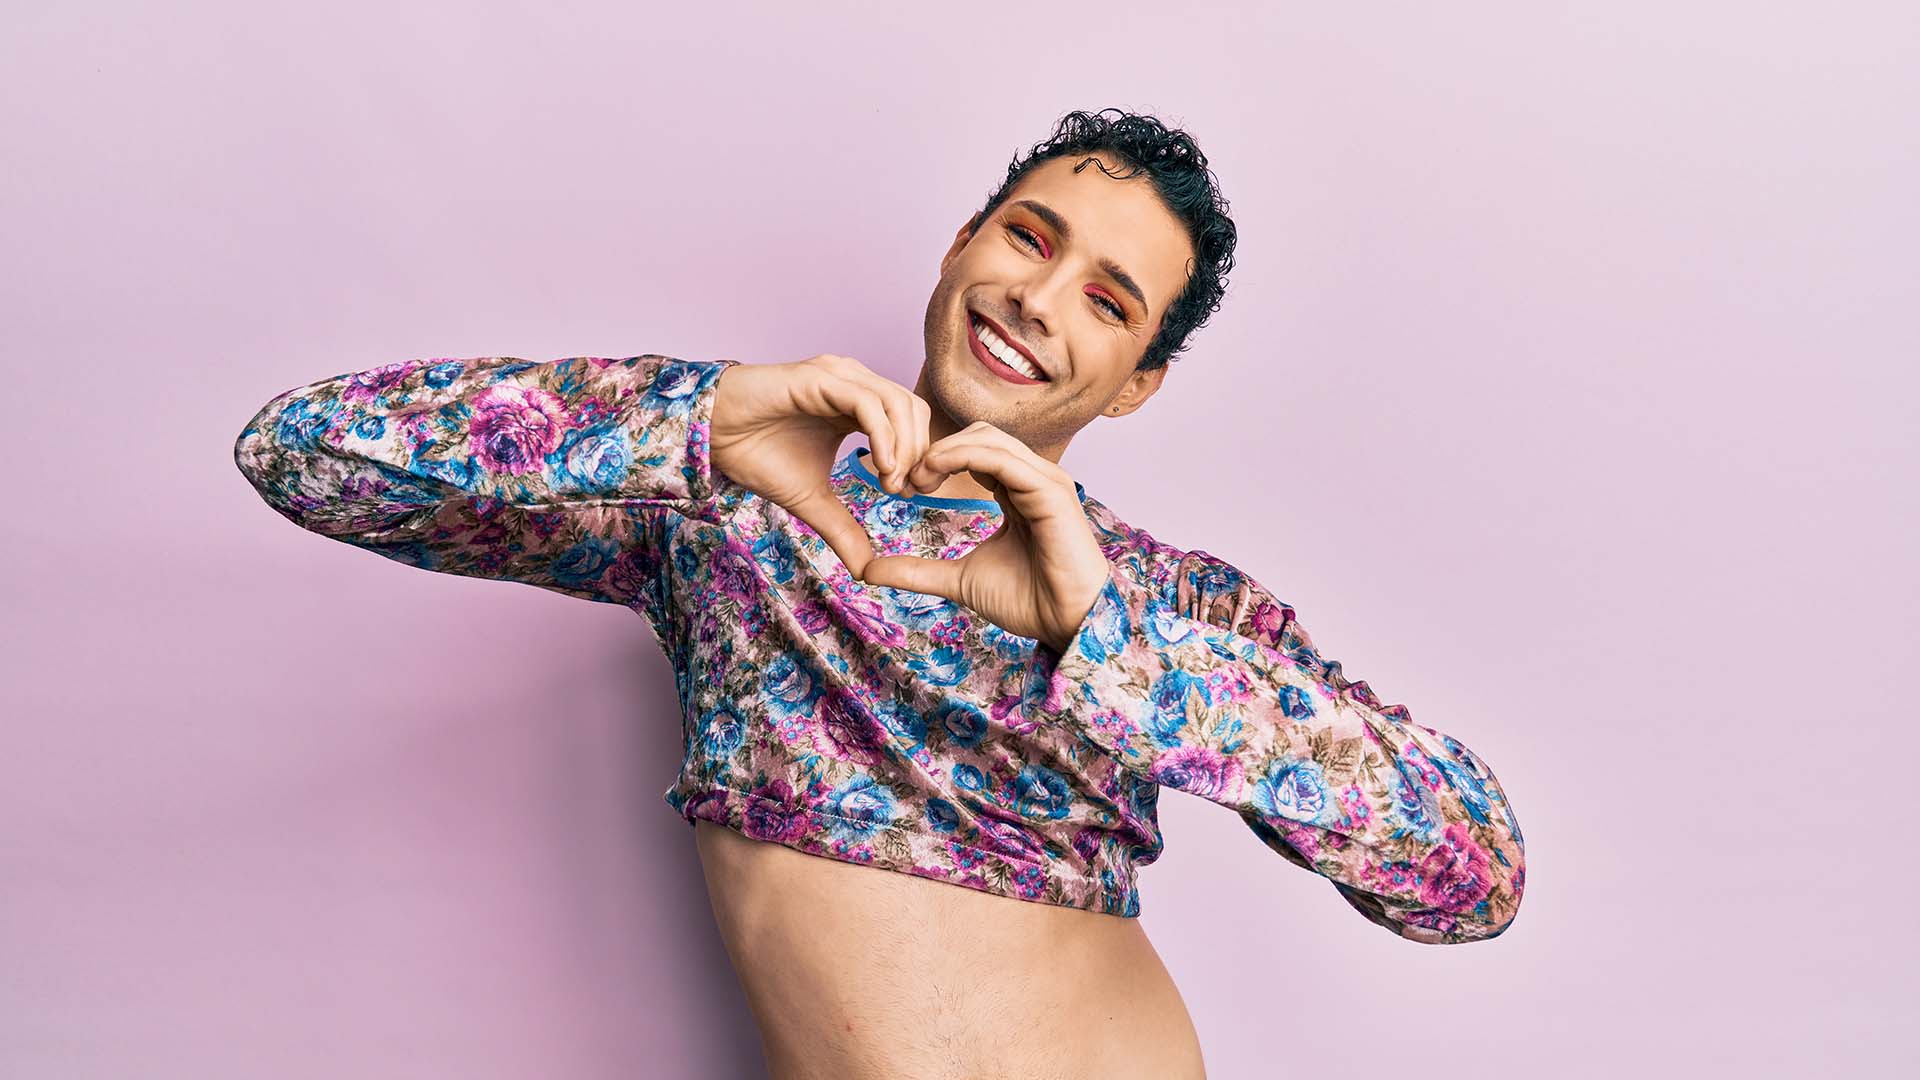 Dark haired trans person in colorful long-sleeved crop top, forming the shape of a love heart with their hands and smiling.